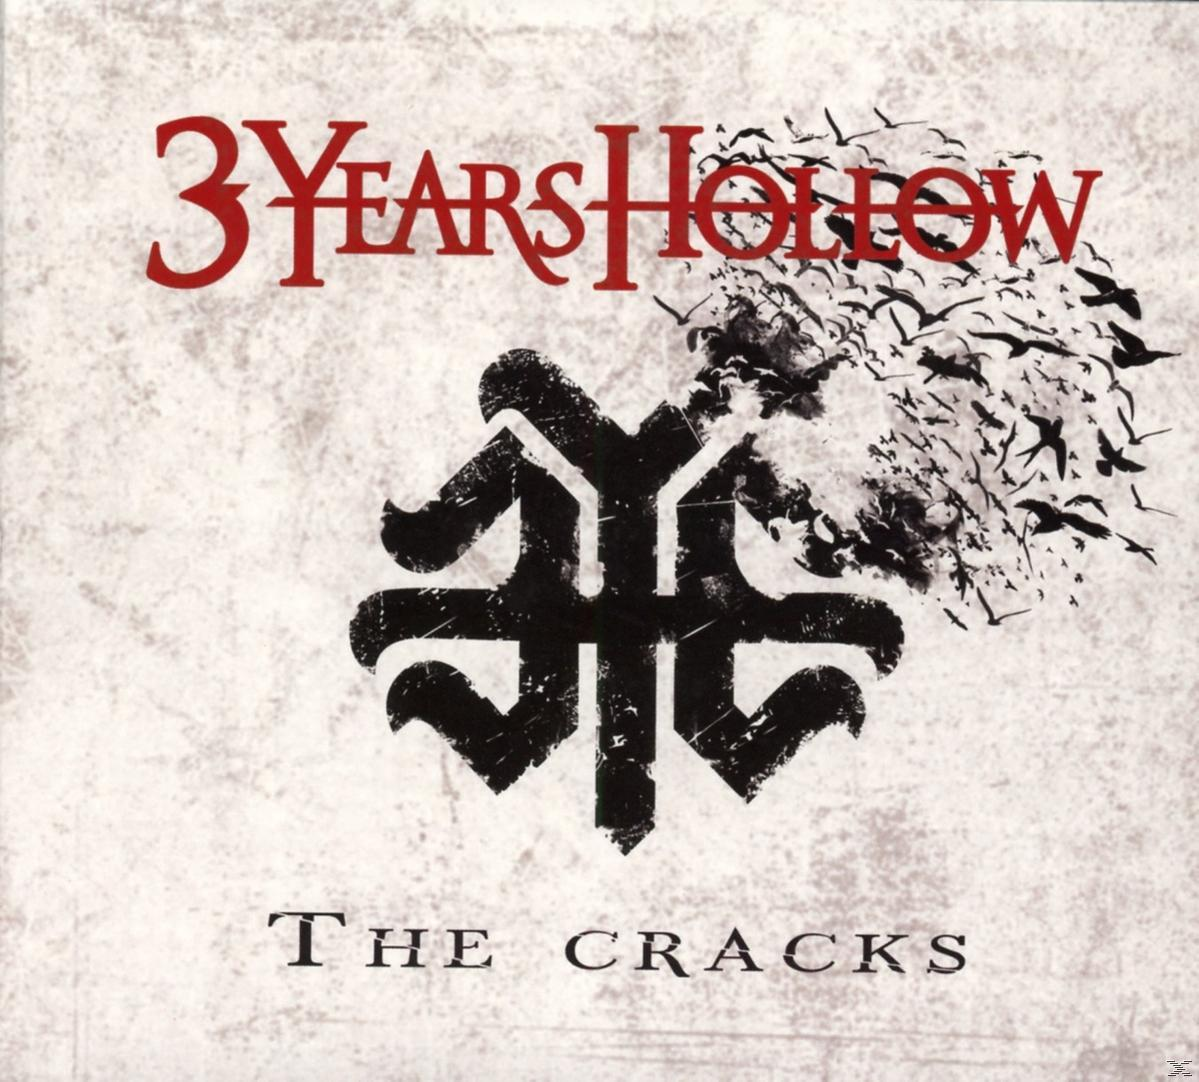 3 Years Hollow Cracks - - The (CD)